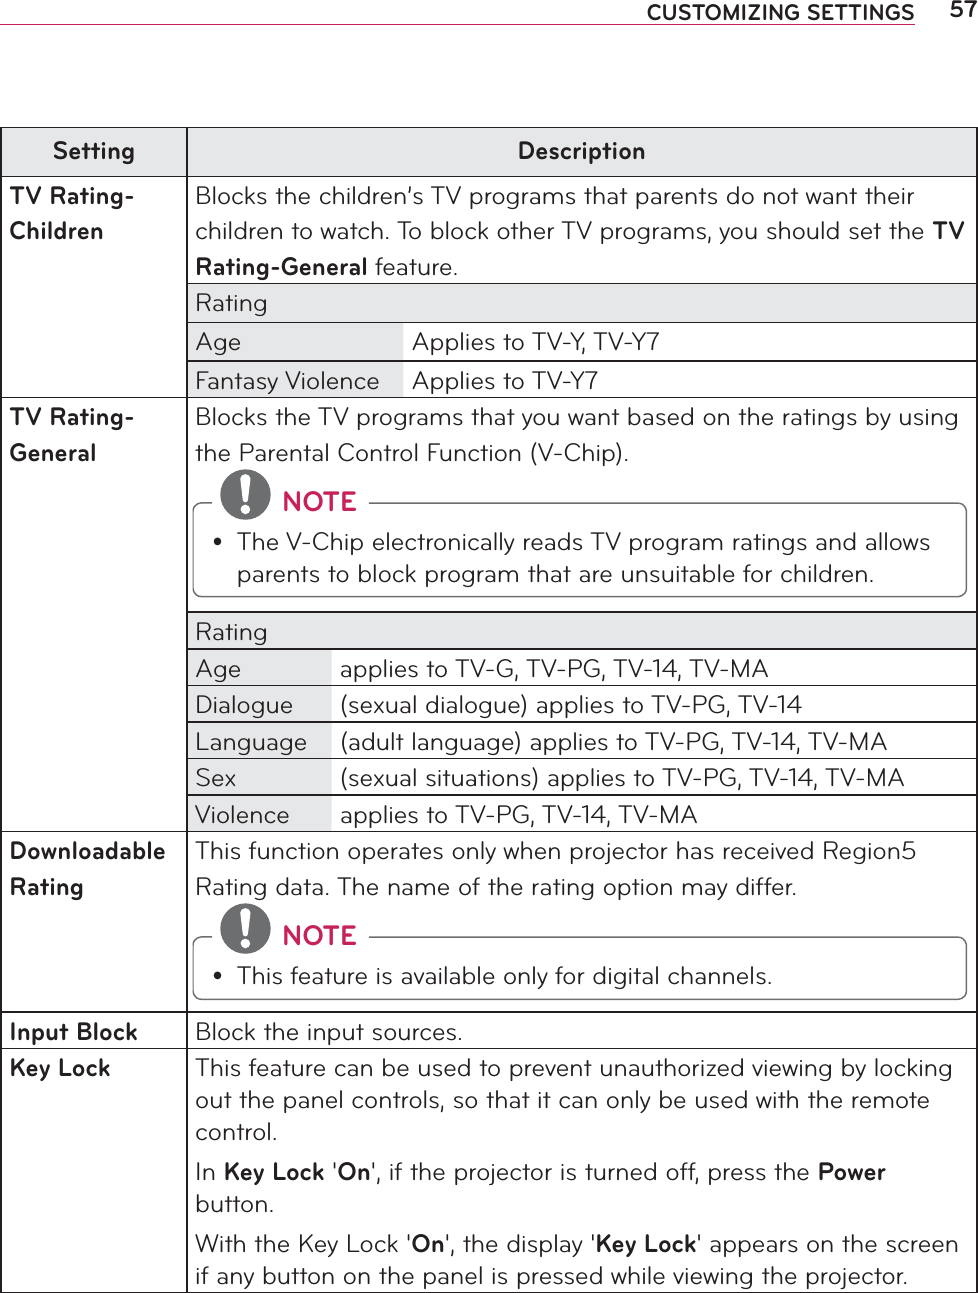 57CUSTOMIZING SETTINGSSetting DescriptionTV Rating-ChildrenBlocks the children’s TV programs that parents do not want their children to watch. To block other TV programs, you should set the TV Rating-General feature.RatingAge Applies to TV-Y, TV-Y7Fantasy Violence Applies to TV-Y7TV Rating-GeneralBlocks the TV programs that you want based on the ratings by using the Parental Control Function (V-Chip). NOTEy The V-Chip electronically reads TV program ratings and allows parents to block program that are unsuitable for children.RatingAge applies to TV-G, TV-PG, TV-14, TV-MADialogue (sexual dialogue) applies to TV-PG, TV-14Language (adult language) applies to TV-PG, TV-14, TV-MASex (sexual situations) applies to TV-PG, TV-14, TV-MAViolence applies to TV-PG, TV-14, TV-MADownloadable RatingThis function operates only when projector has received Region5 Rating data. The name of the rating option may differ. NOTEy This feature is available only for digital channels.Input Block Block the input sources.Key Lock This feature can be used to prevent unauthorized viewing by locking out the panel controls, so that it can only be used with the remote control.In Key Lock &apos;On&apos;, if the projector is turned off, press the Power button.With the Key Lock &apos;On&apos;, the display &apos;Key Lock&apos; appears on the screen if any button on the panel is pressed while viewing the projector.